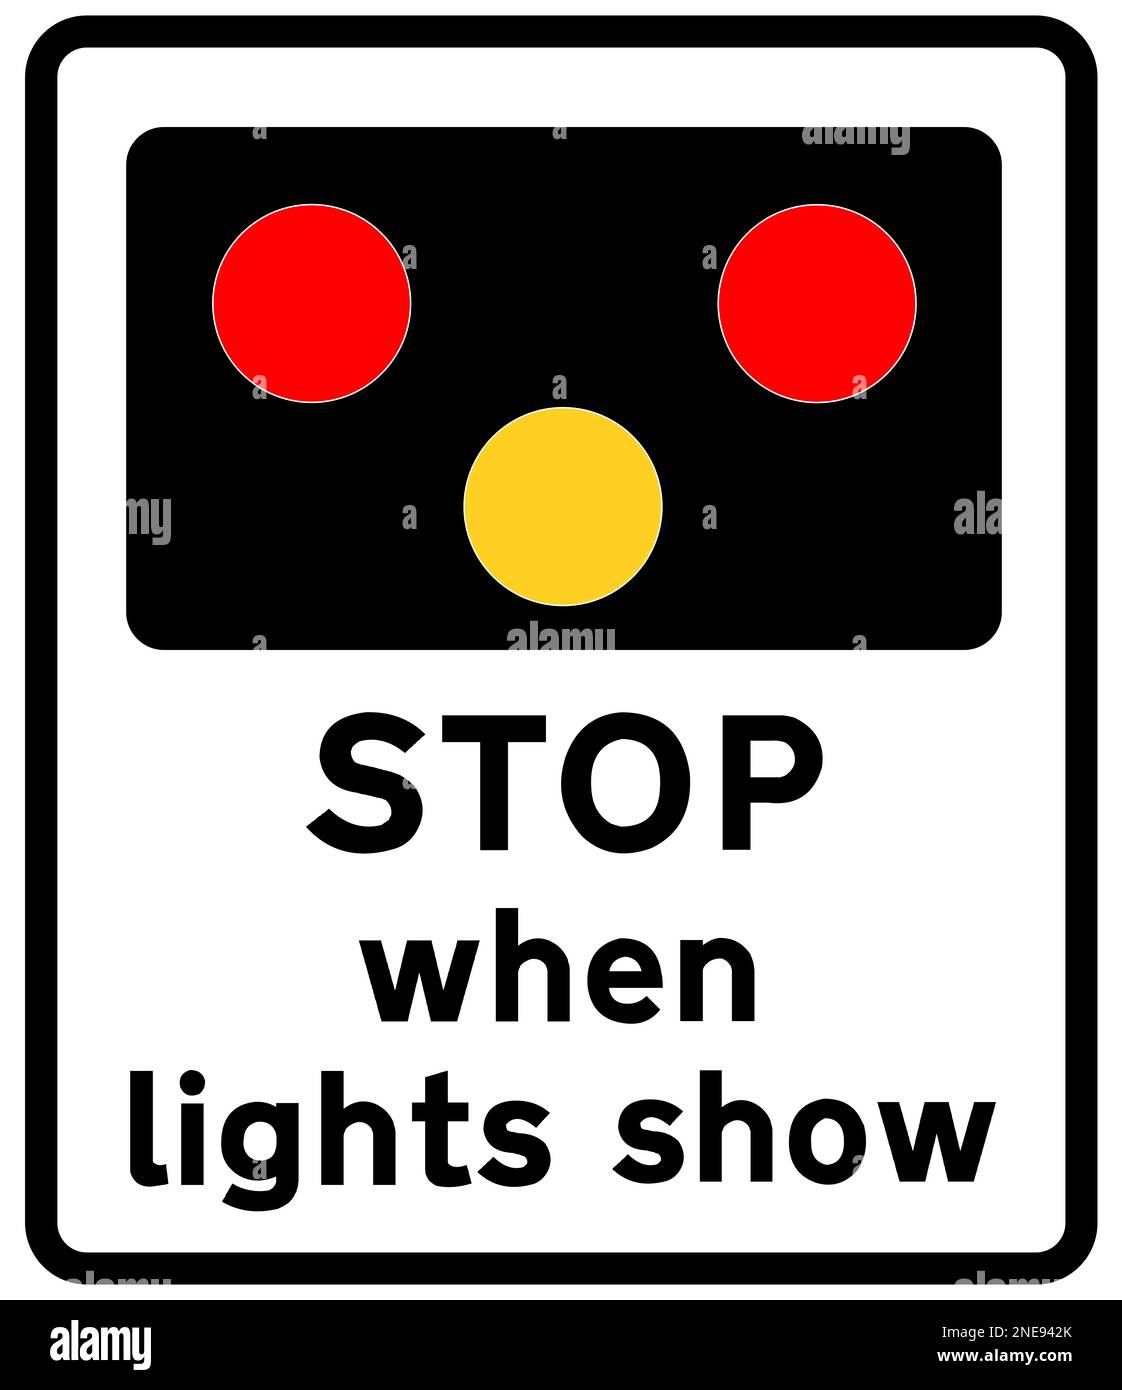 Stop when ligths show British road sign Stock Photo